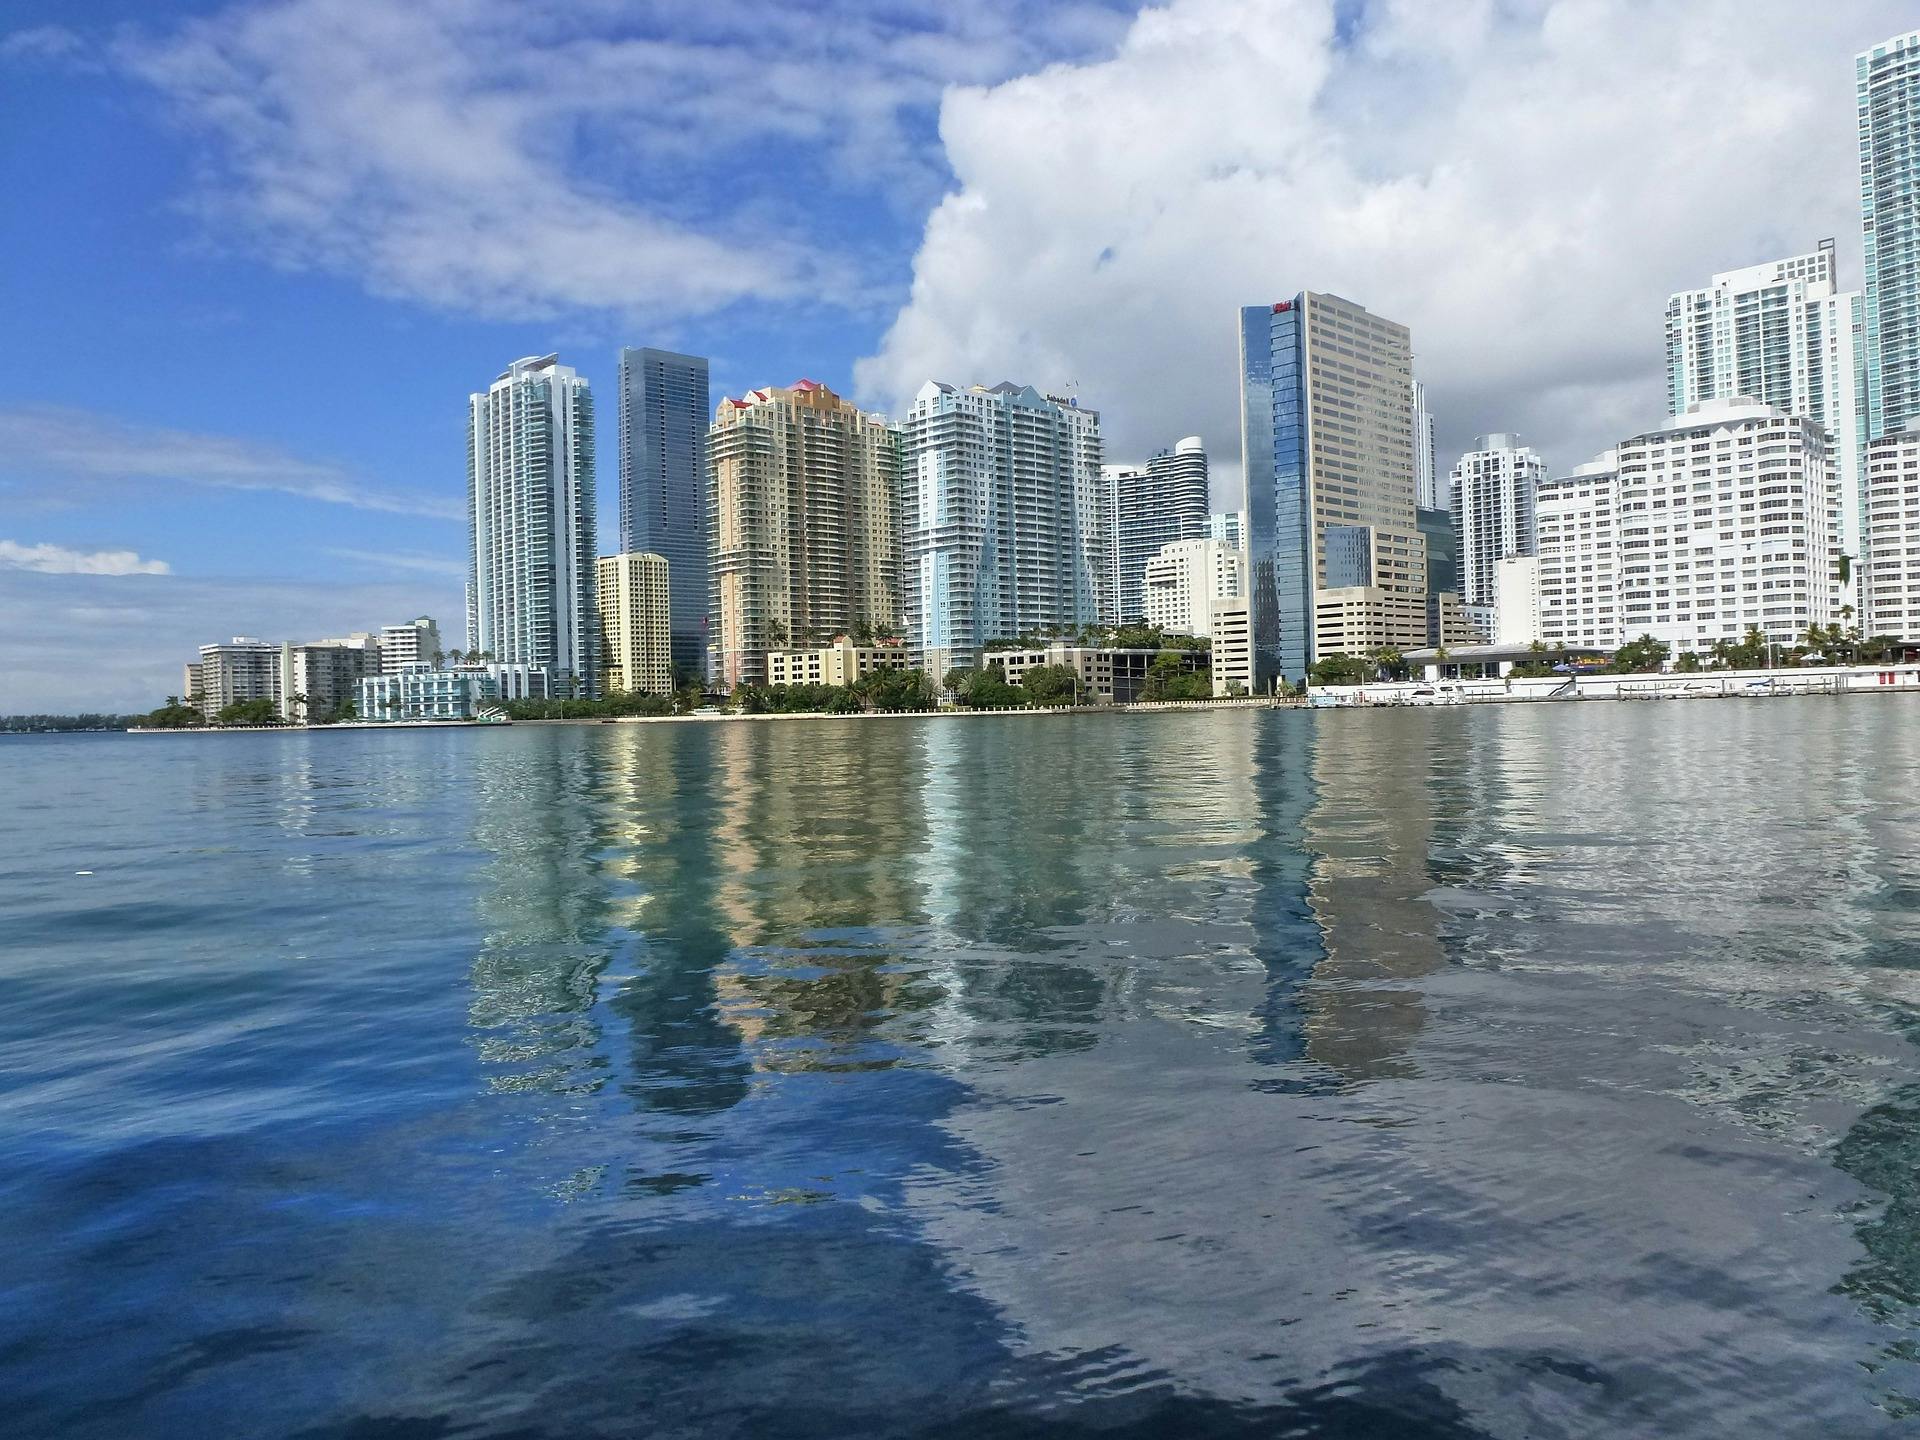 Miami sightseeing cruise of South Beach, Biscayne Bay, & Venetian Islands